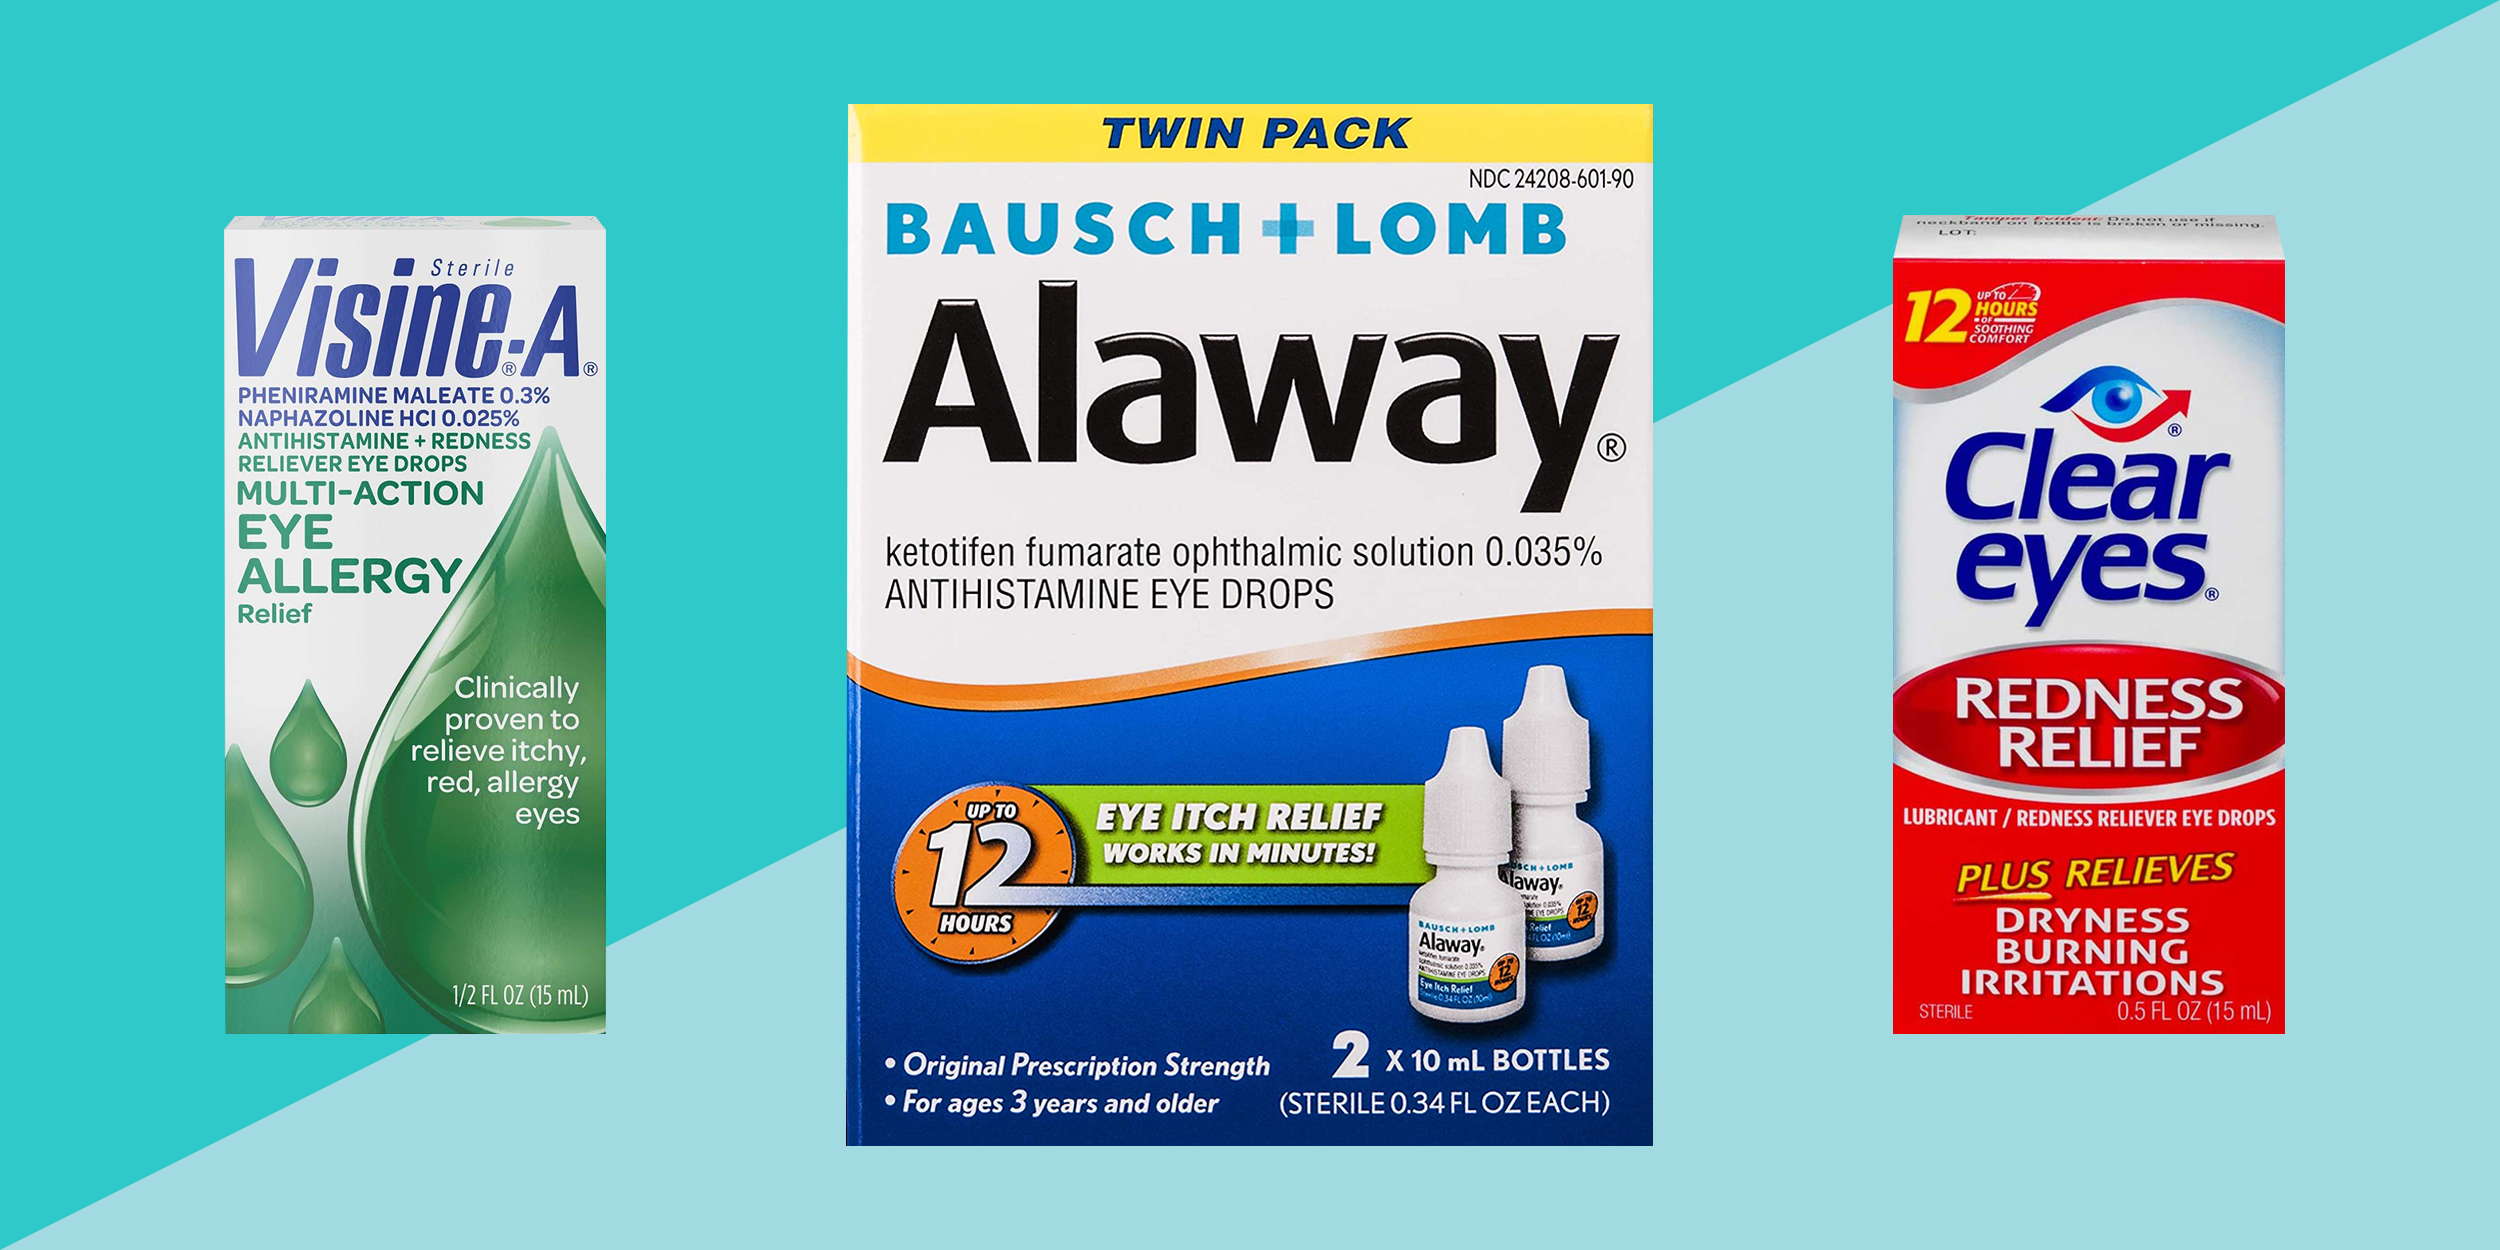 Best Allergy Eye Drops for Itchy, Red Eyes 2021, Per Doctors